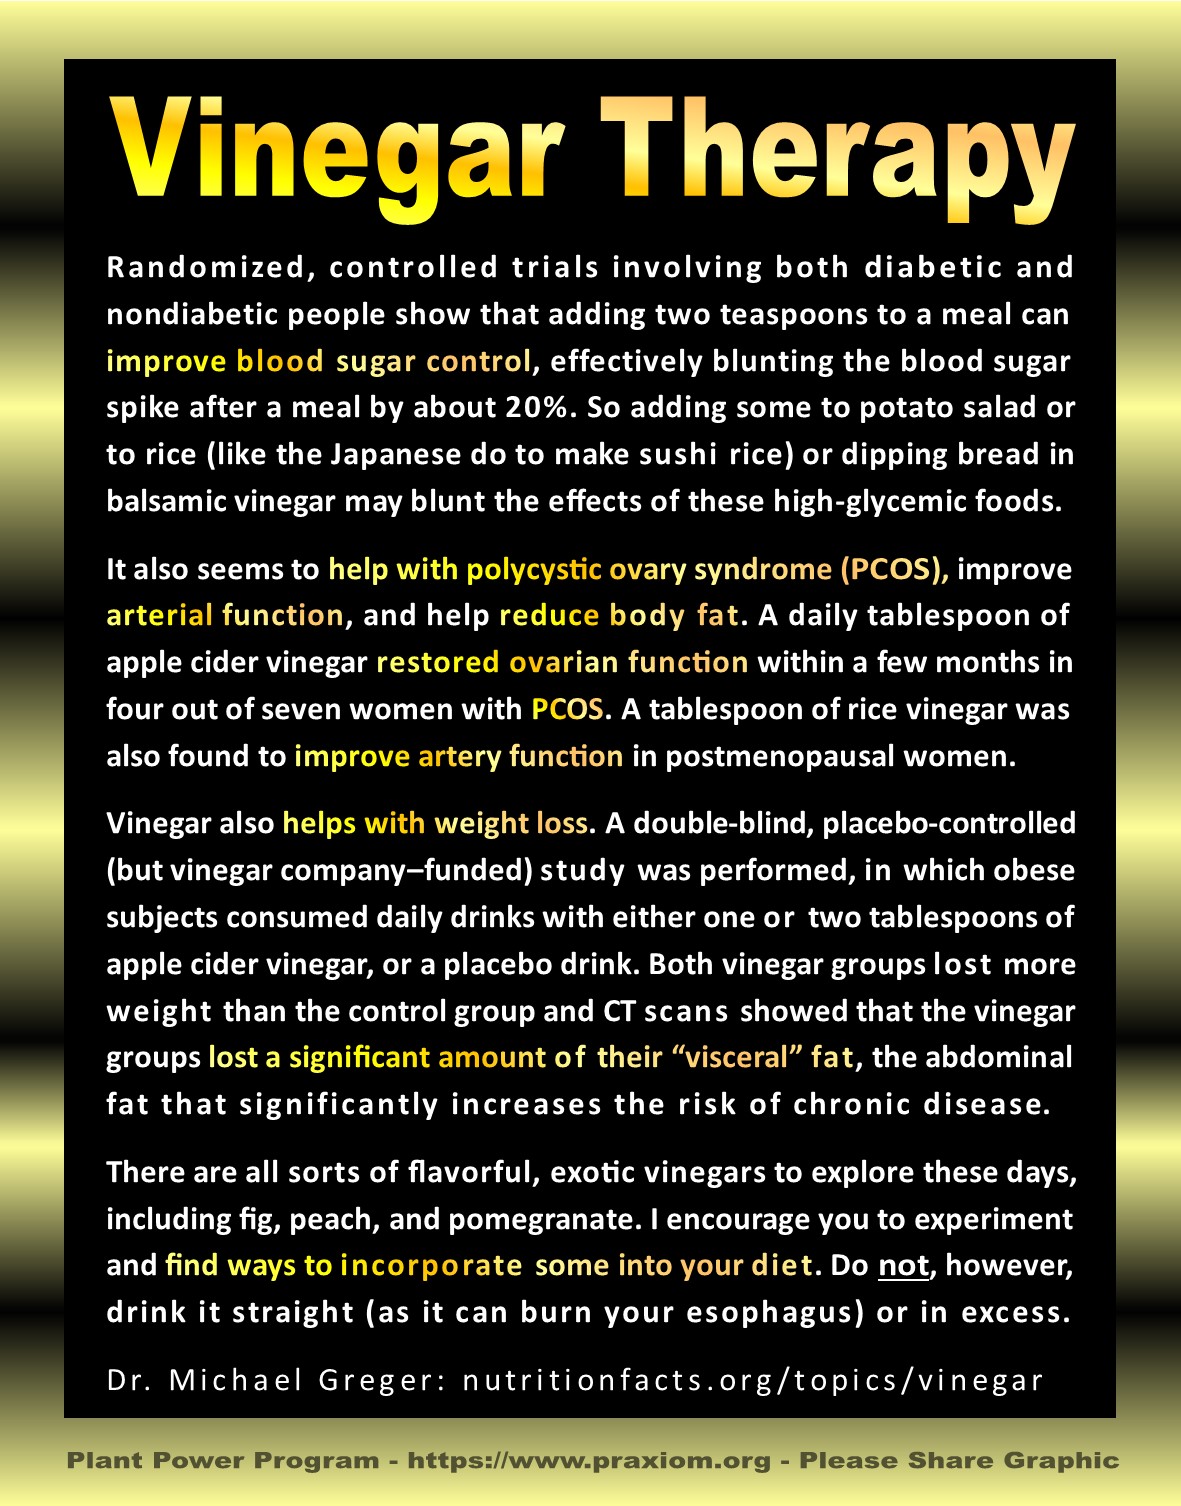 Vinegar Therapy - Dr Michael Greger